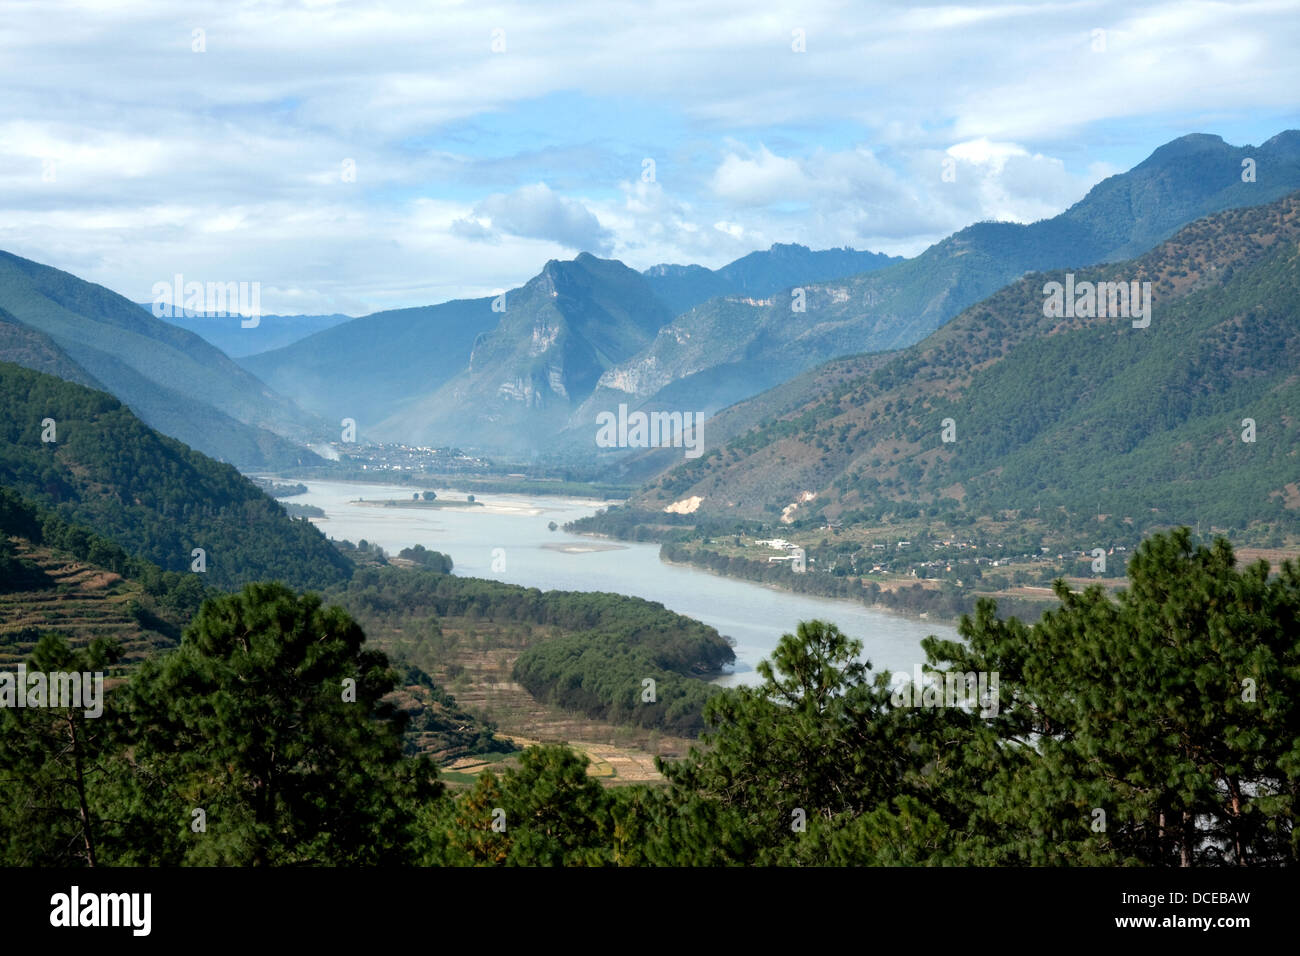 View of the Yangtze River in China Stock Photo